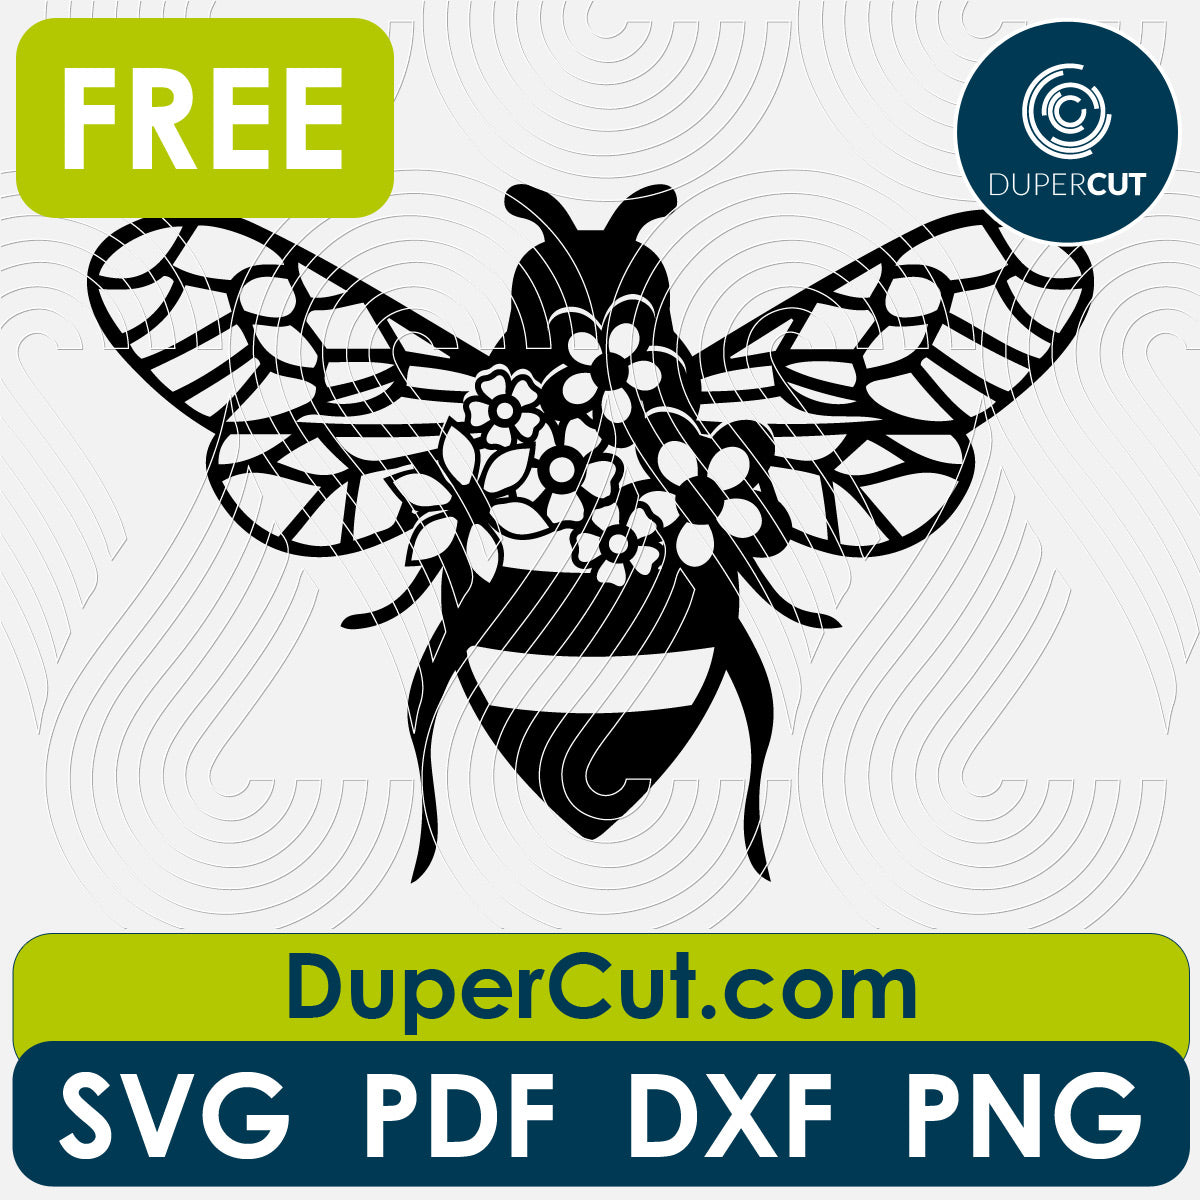 Floral bee - free cutting files SVG DXF vector template for laser cutting and engraving. For Glowforge, Cricut, Silhouette, scroll saw, cnc plasma machines by DuperCut